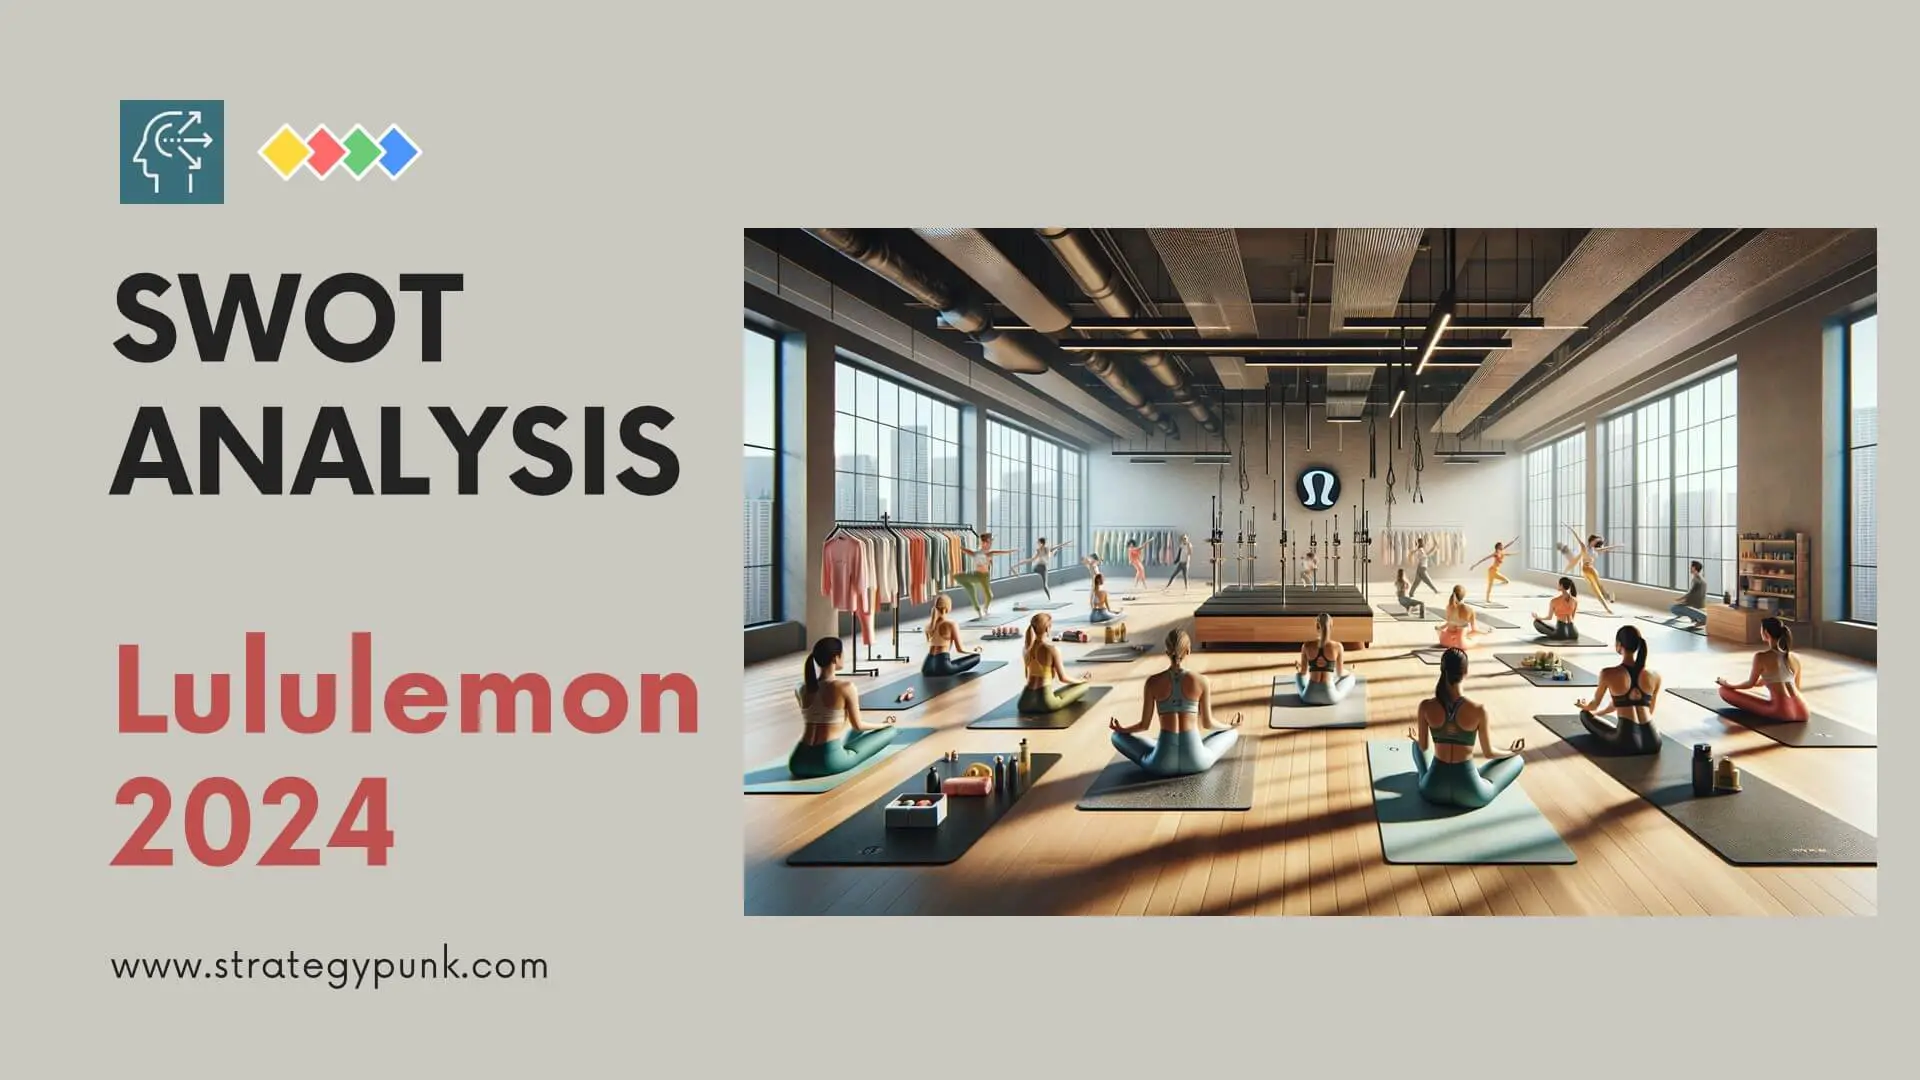 Lululemon SWOT Analysis: Free PPT Template and In-Depth